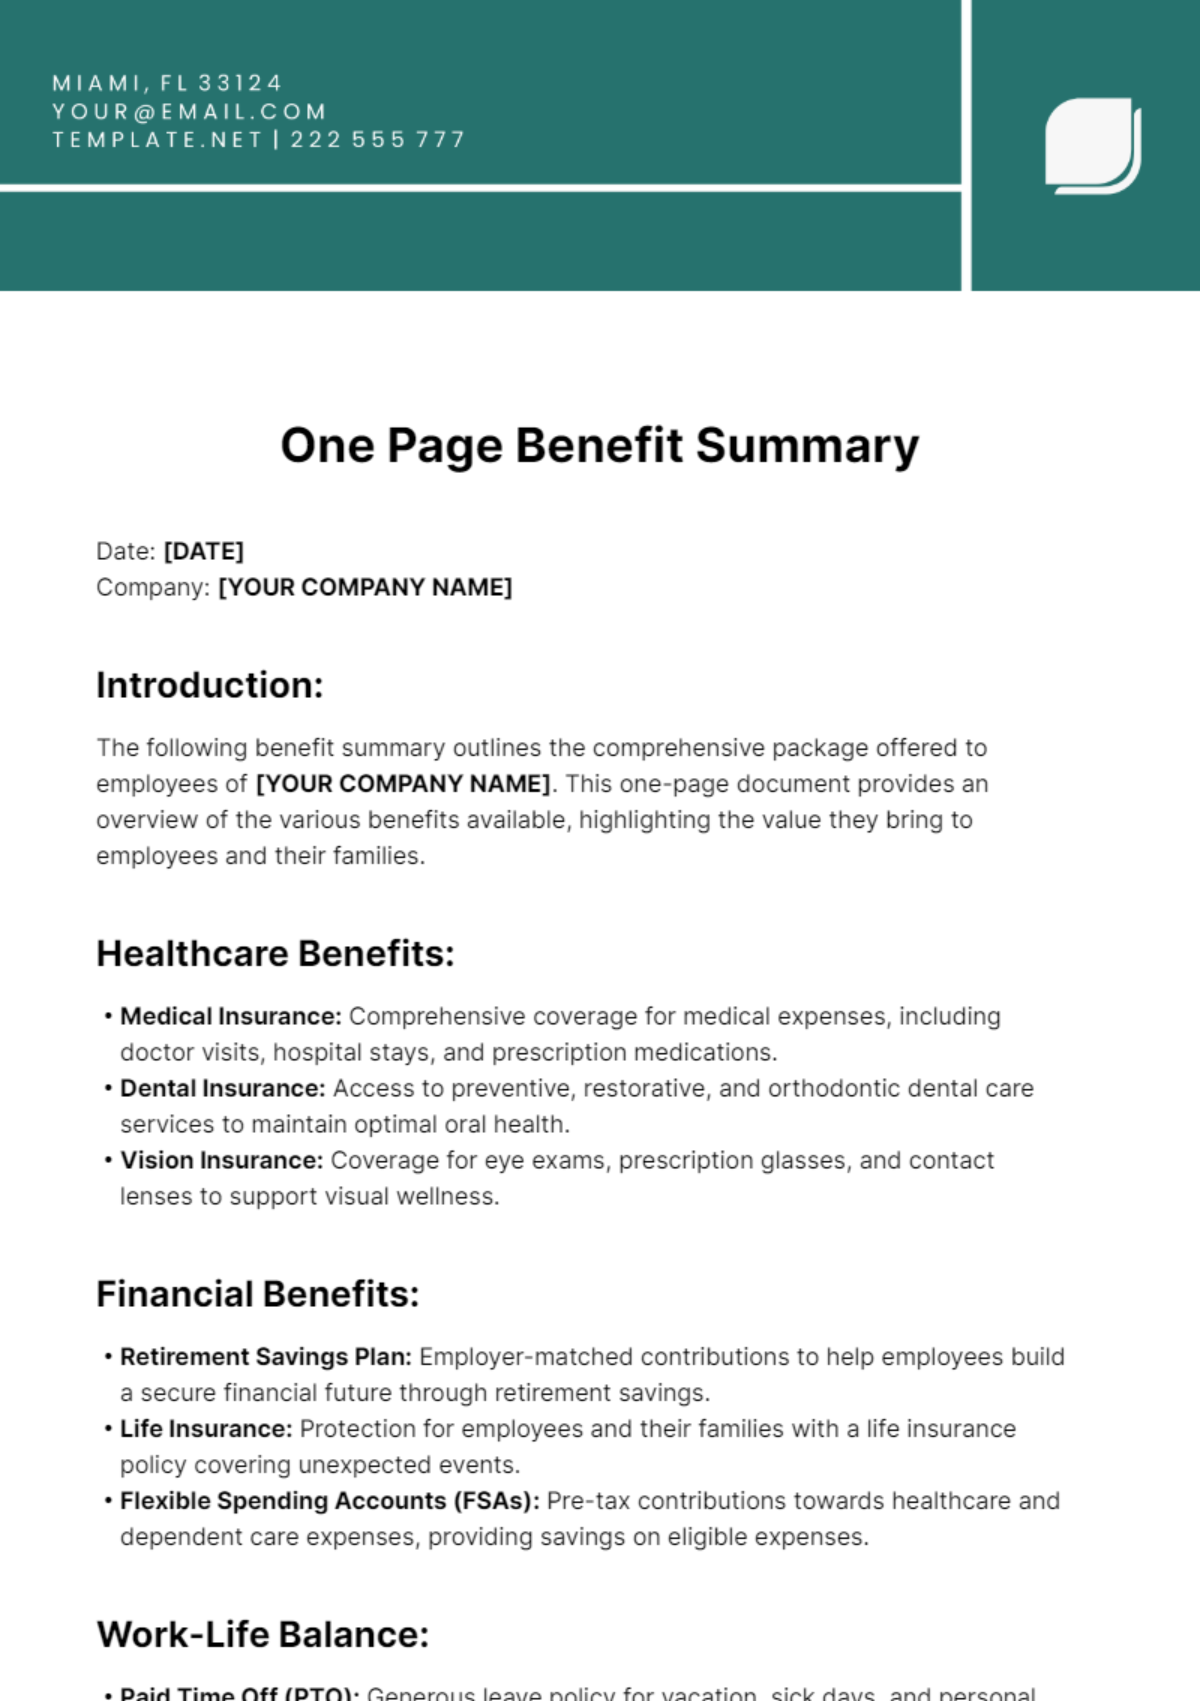 One Page Benefit Summary Template